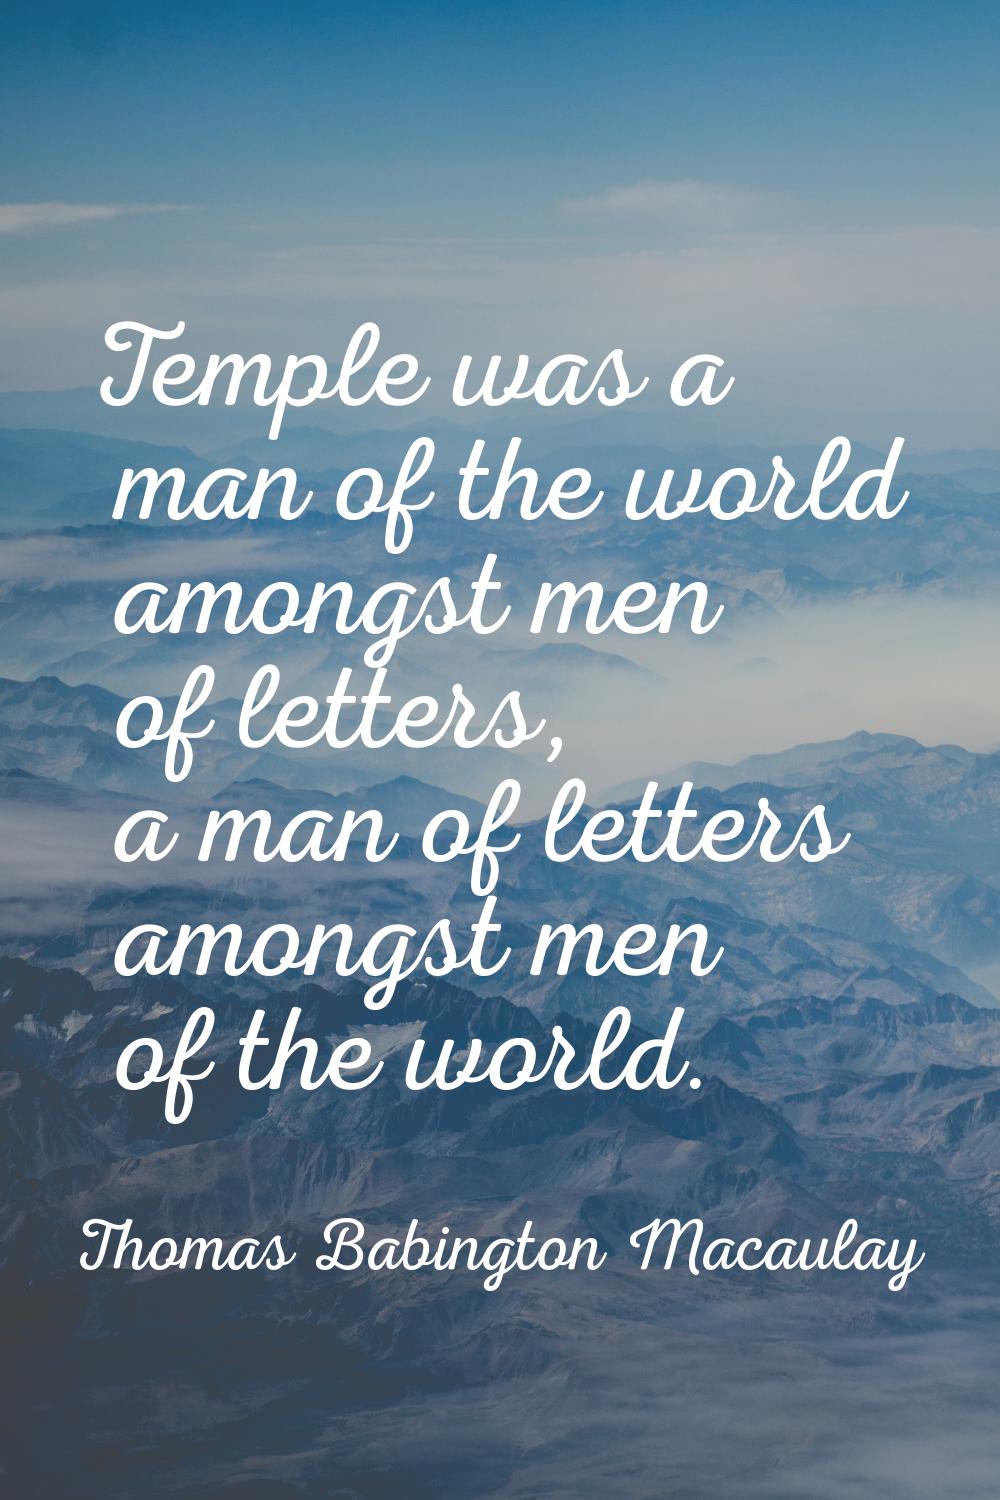 Temple was a man of the world amongst men of letters, a man of letters amongst men of the world.